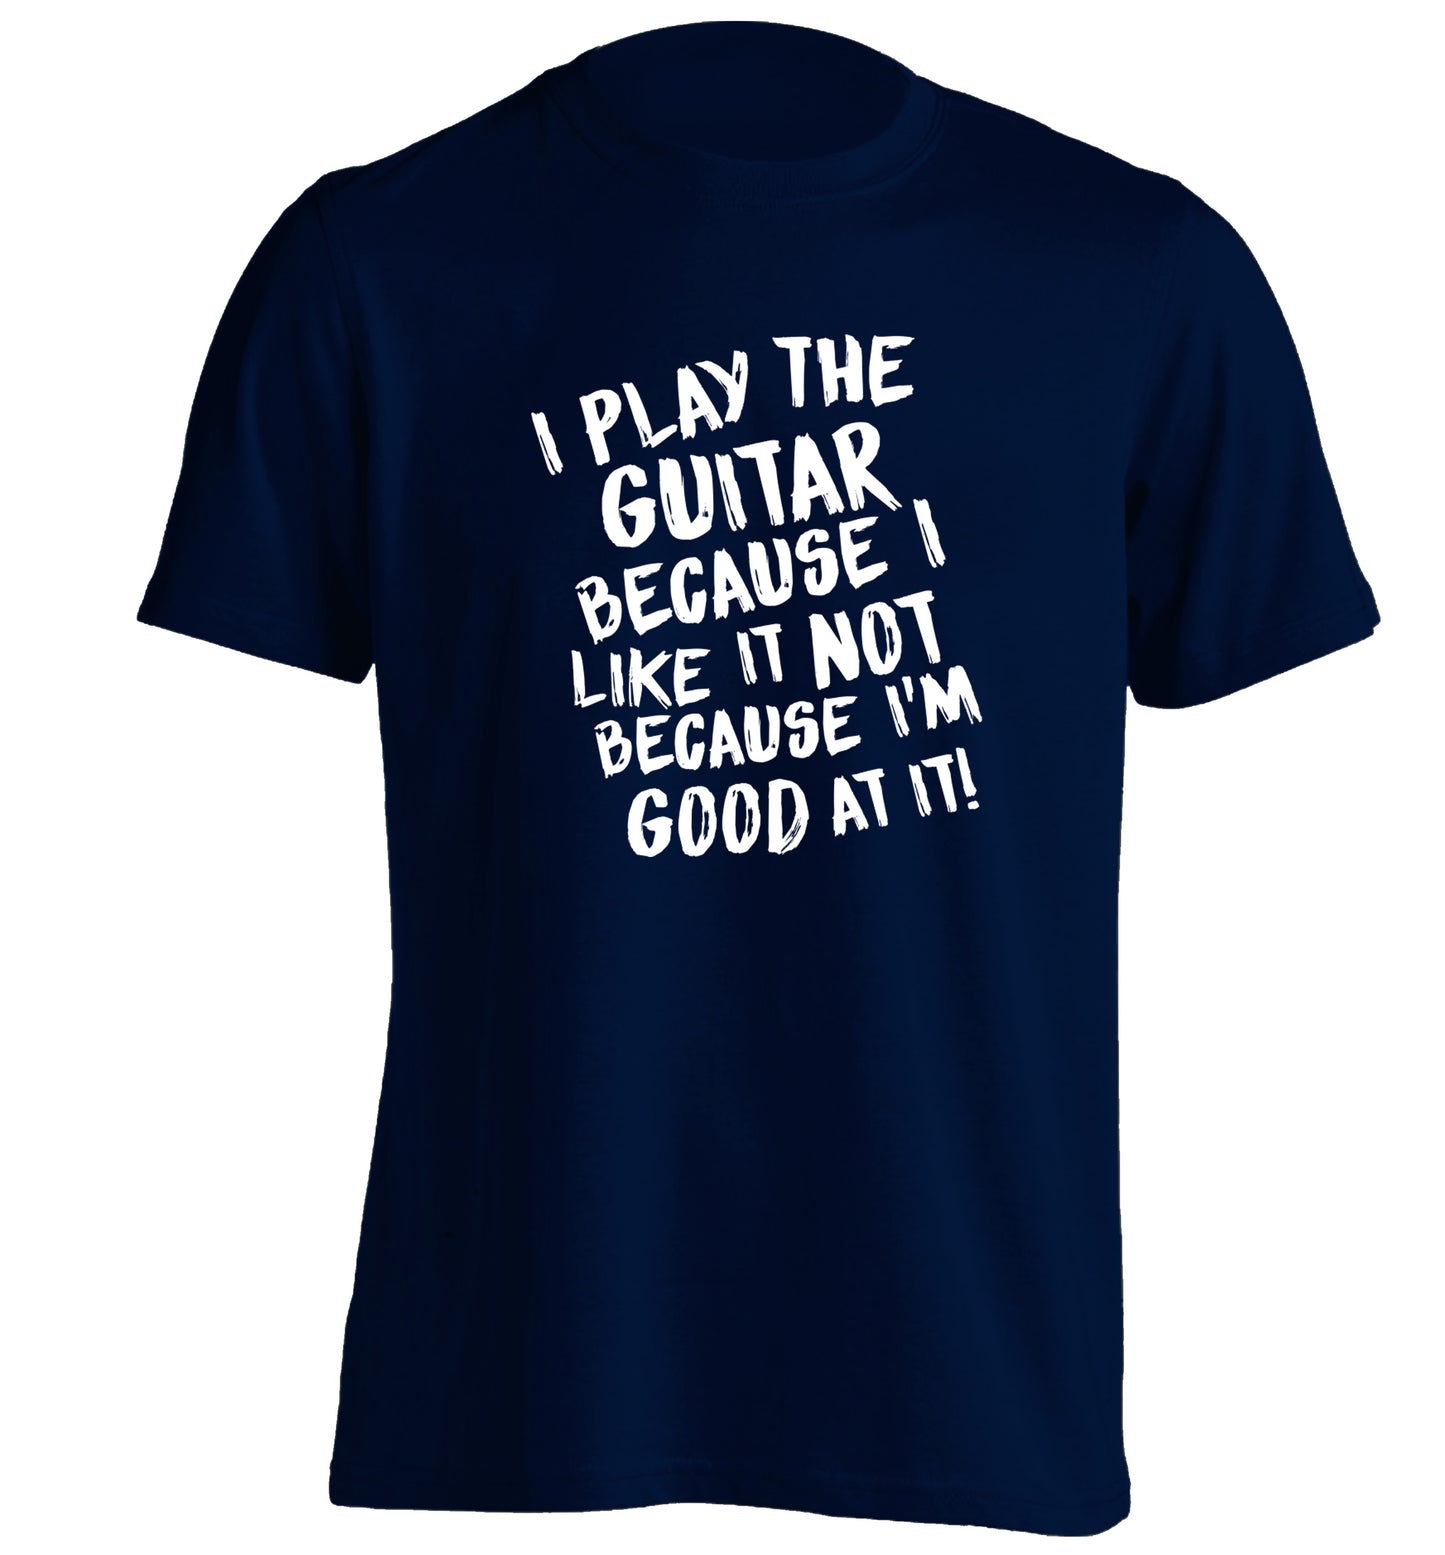 I play the guitar because I like it not because I'm good at it adults unisex navy Tshirt 2XL